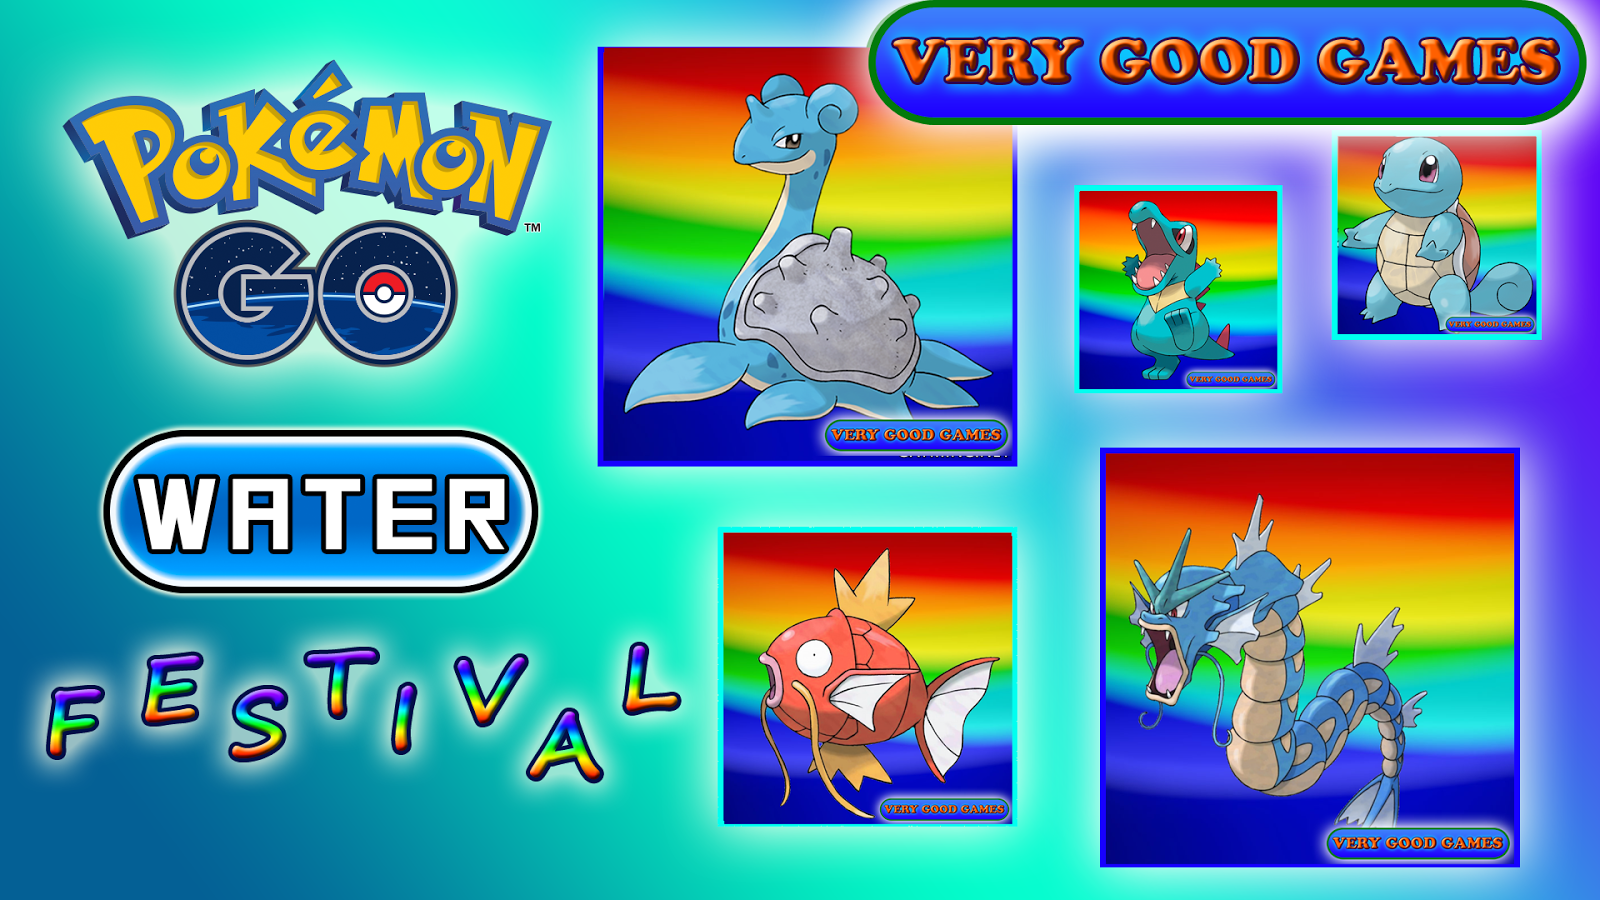 News on Very Good Games about Water Festival in the Pokemon Go game